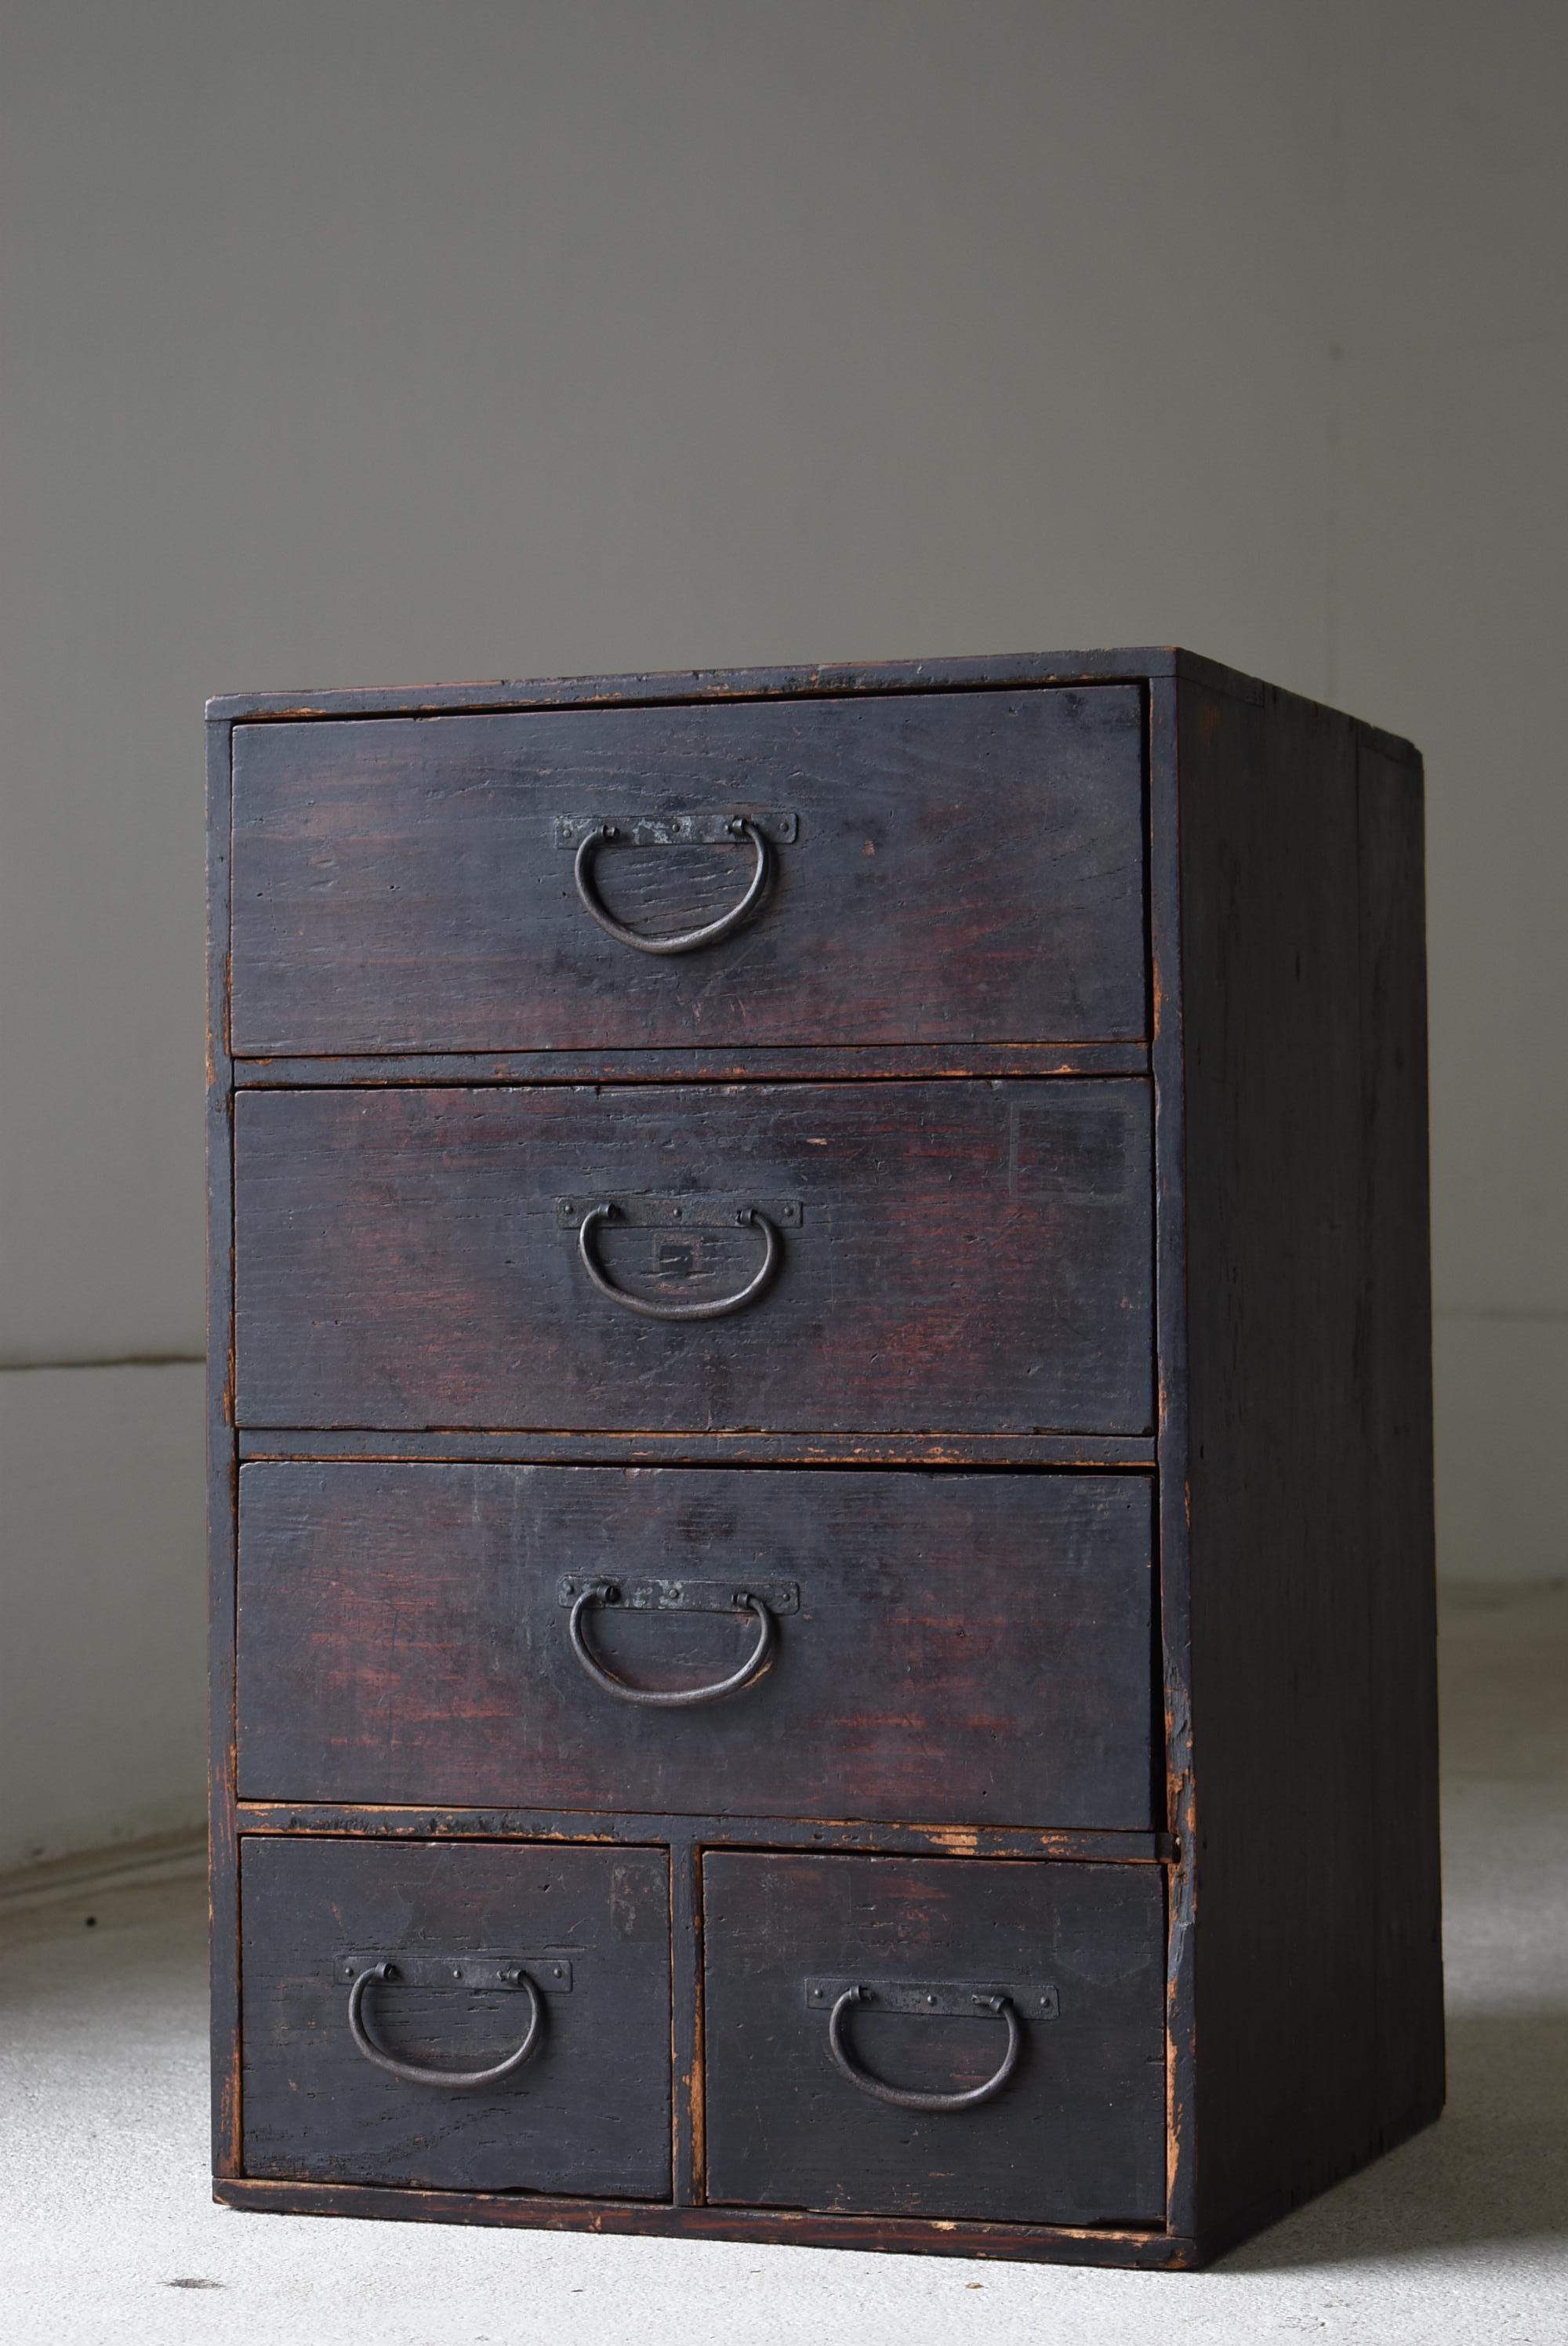 This is a very old Japanese drawer.
It is from the Meiji period (1860s-1900s).
It is made of cedar wood.

It has a simple design with no waste.
It is a very beautiful piece of furniture.

The drawers move smoothly and are in good